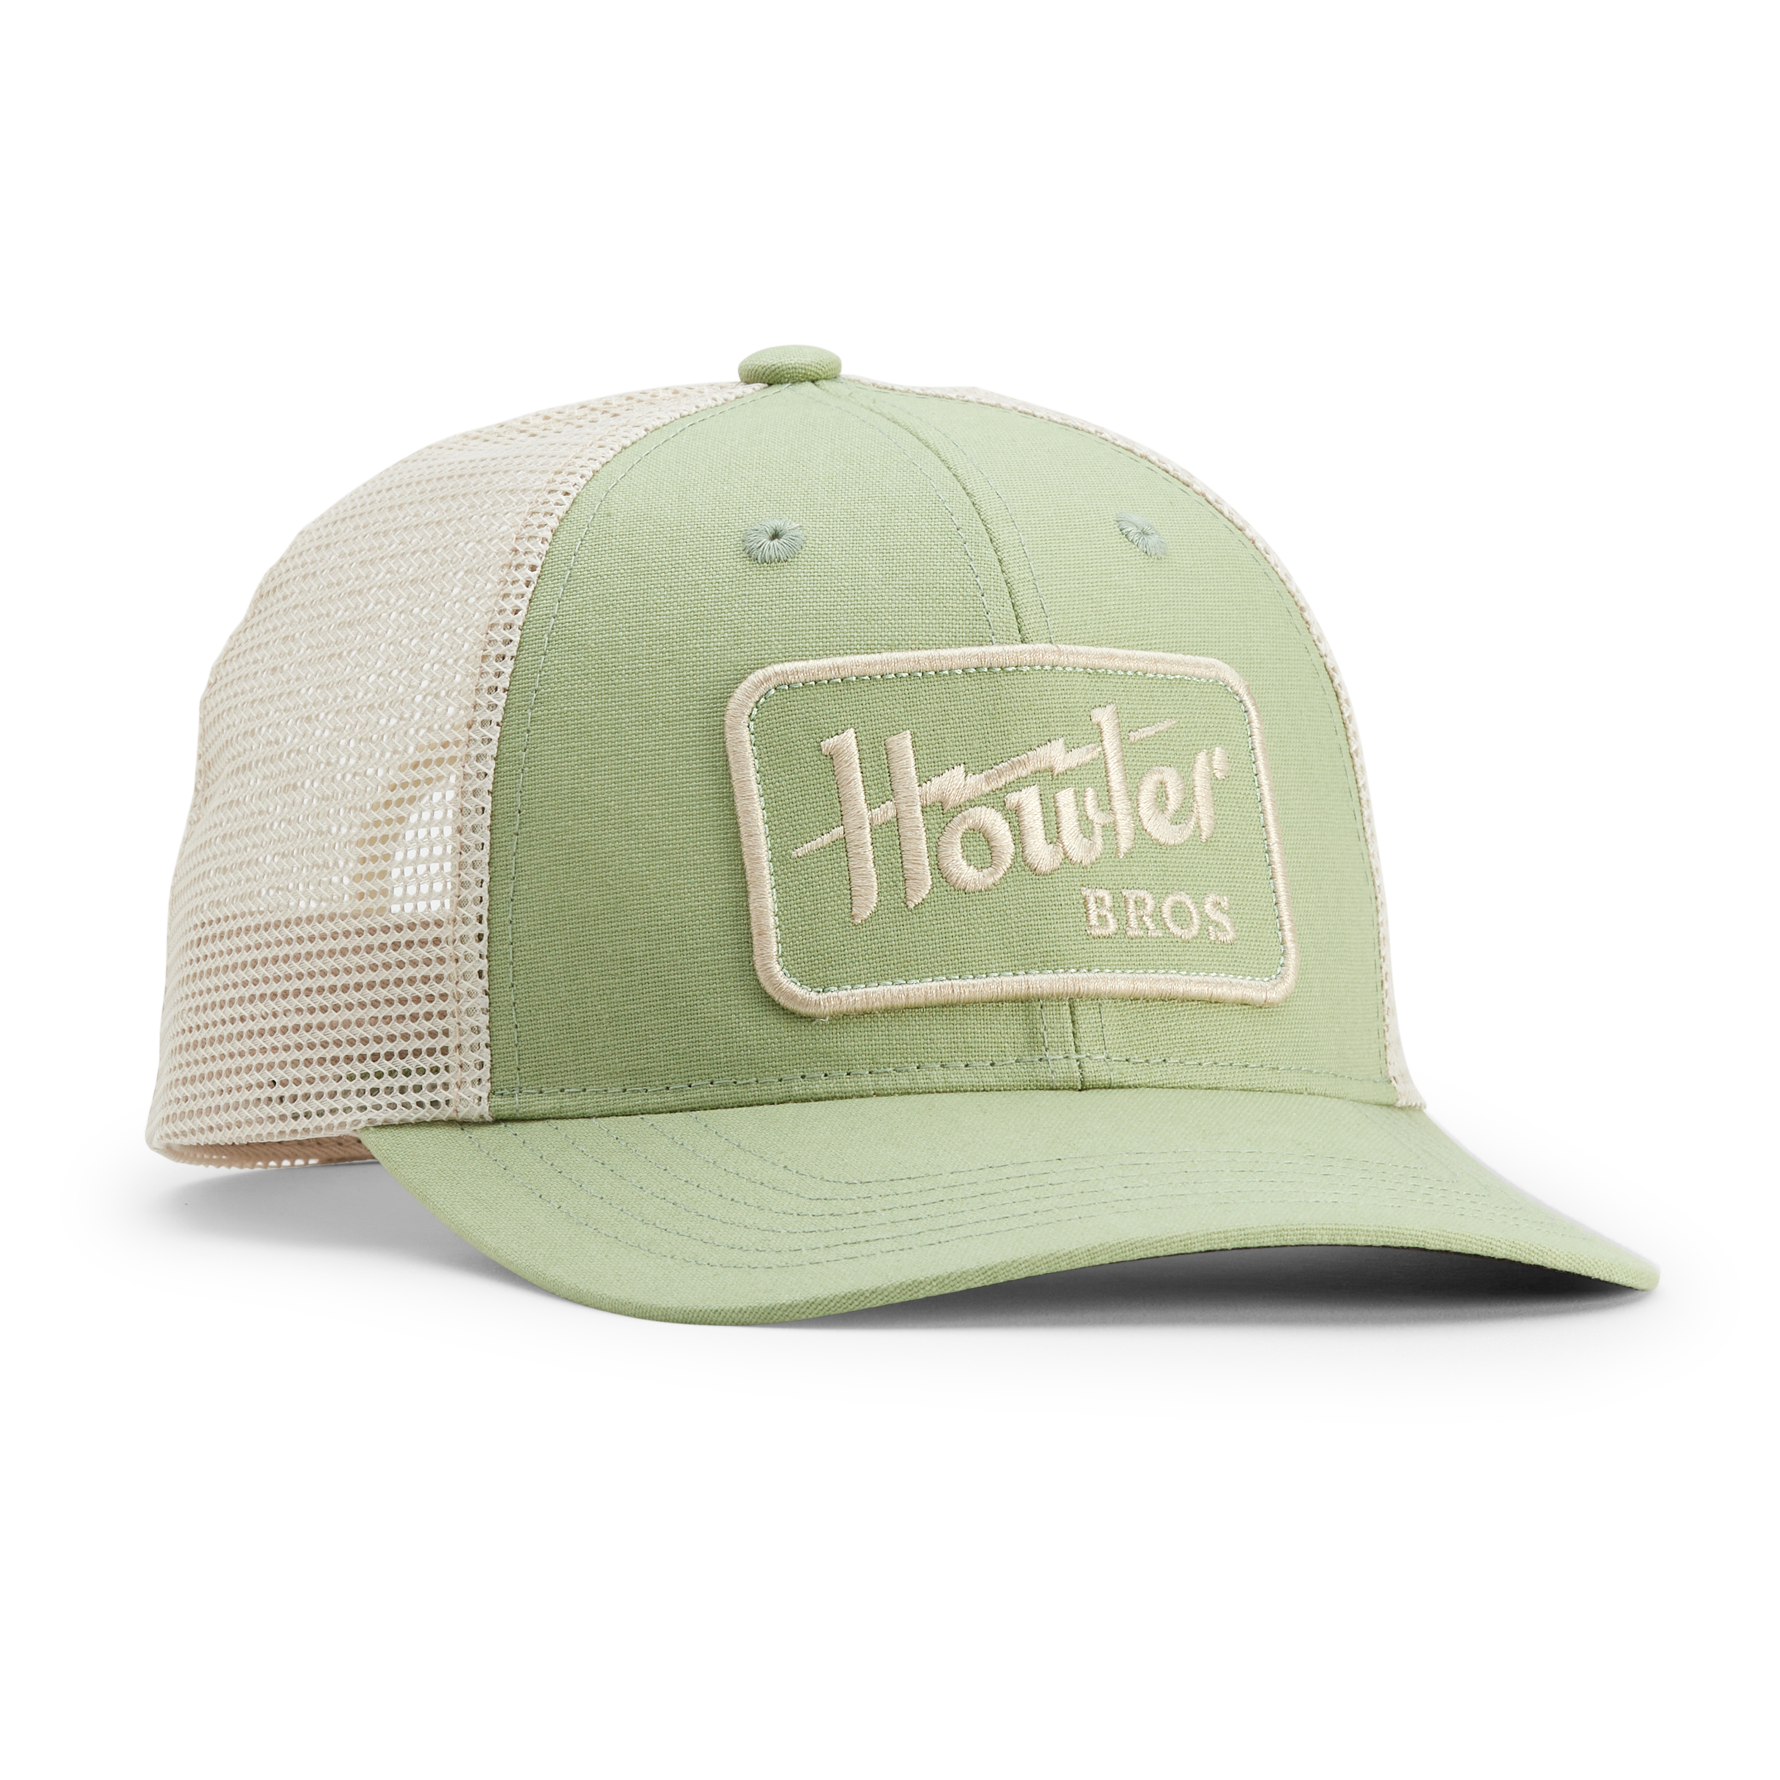 Howler Brothers Standard Hats : Howler Electric